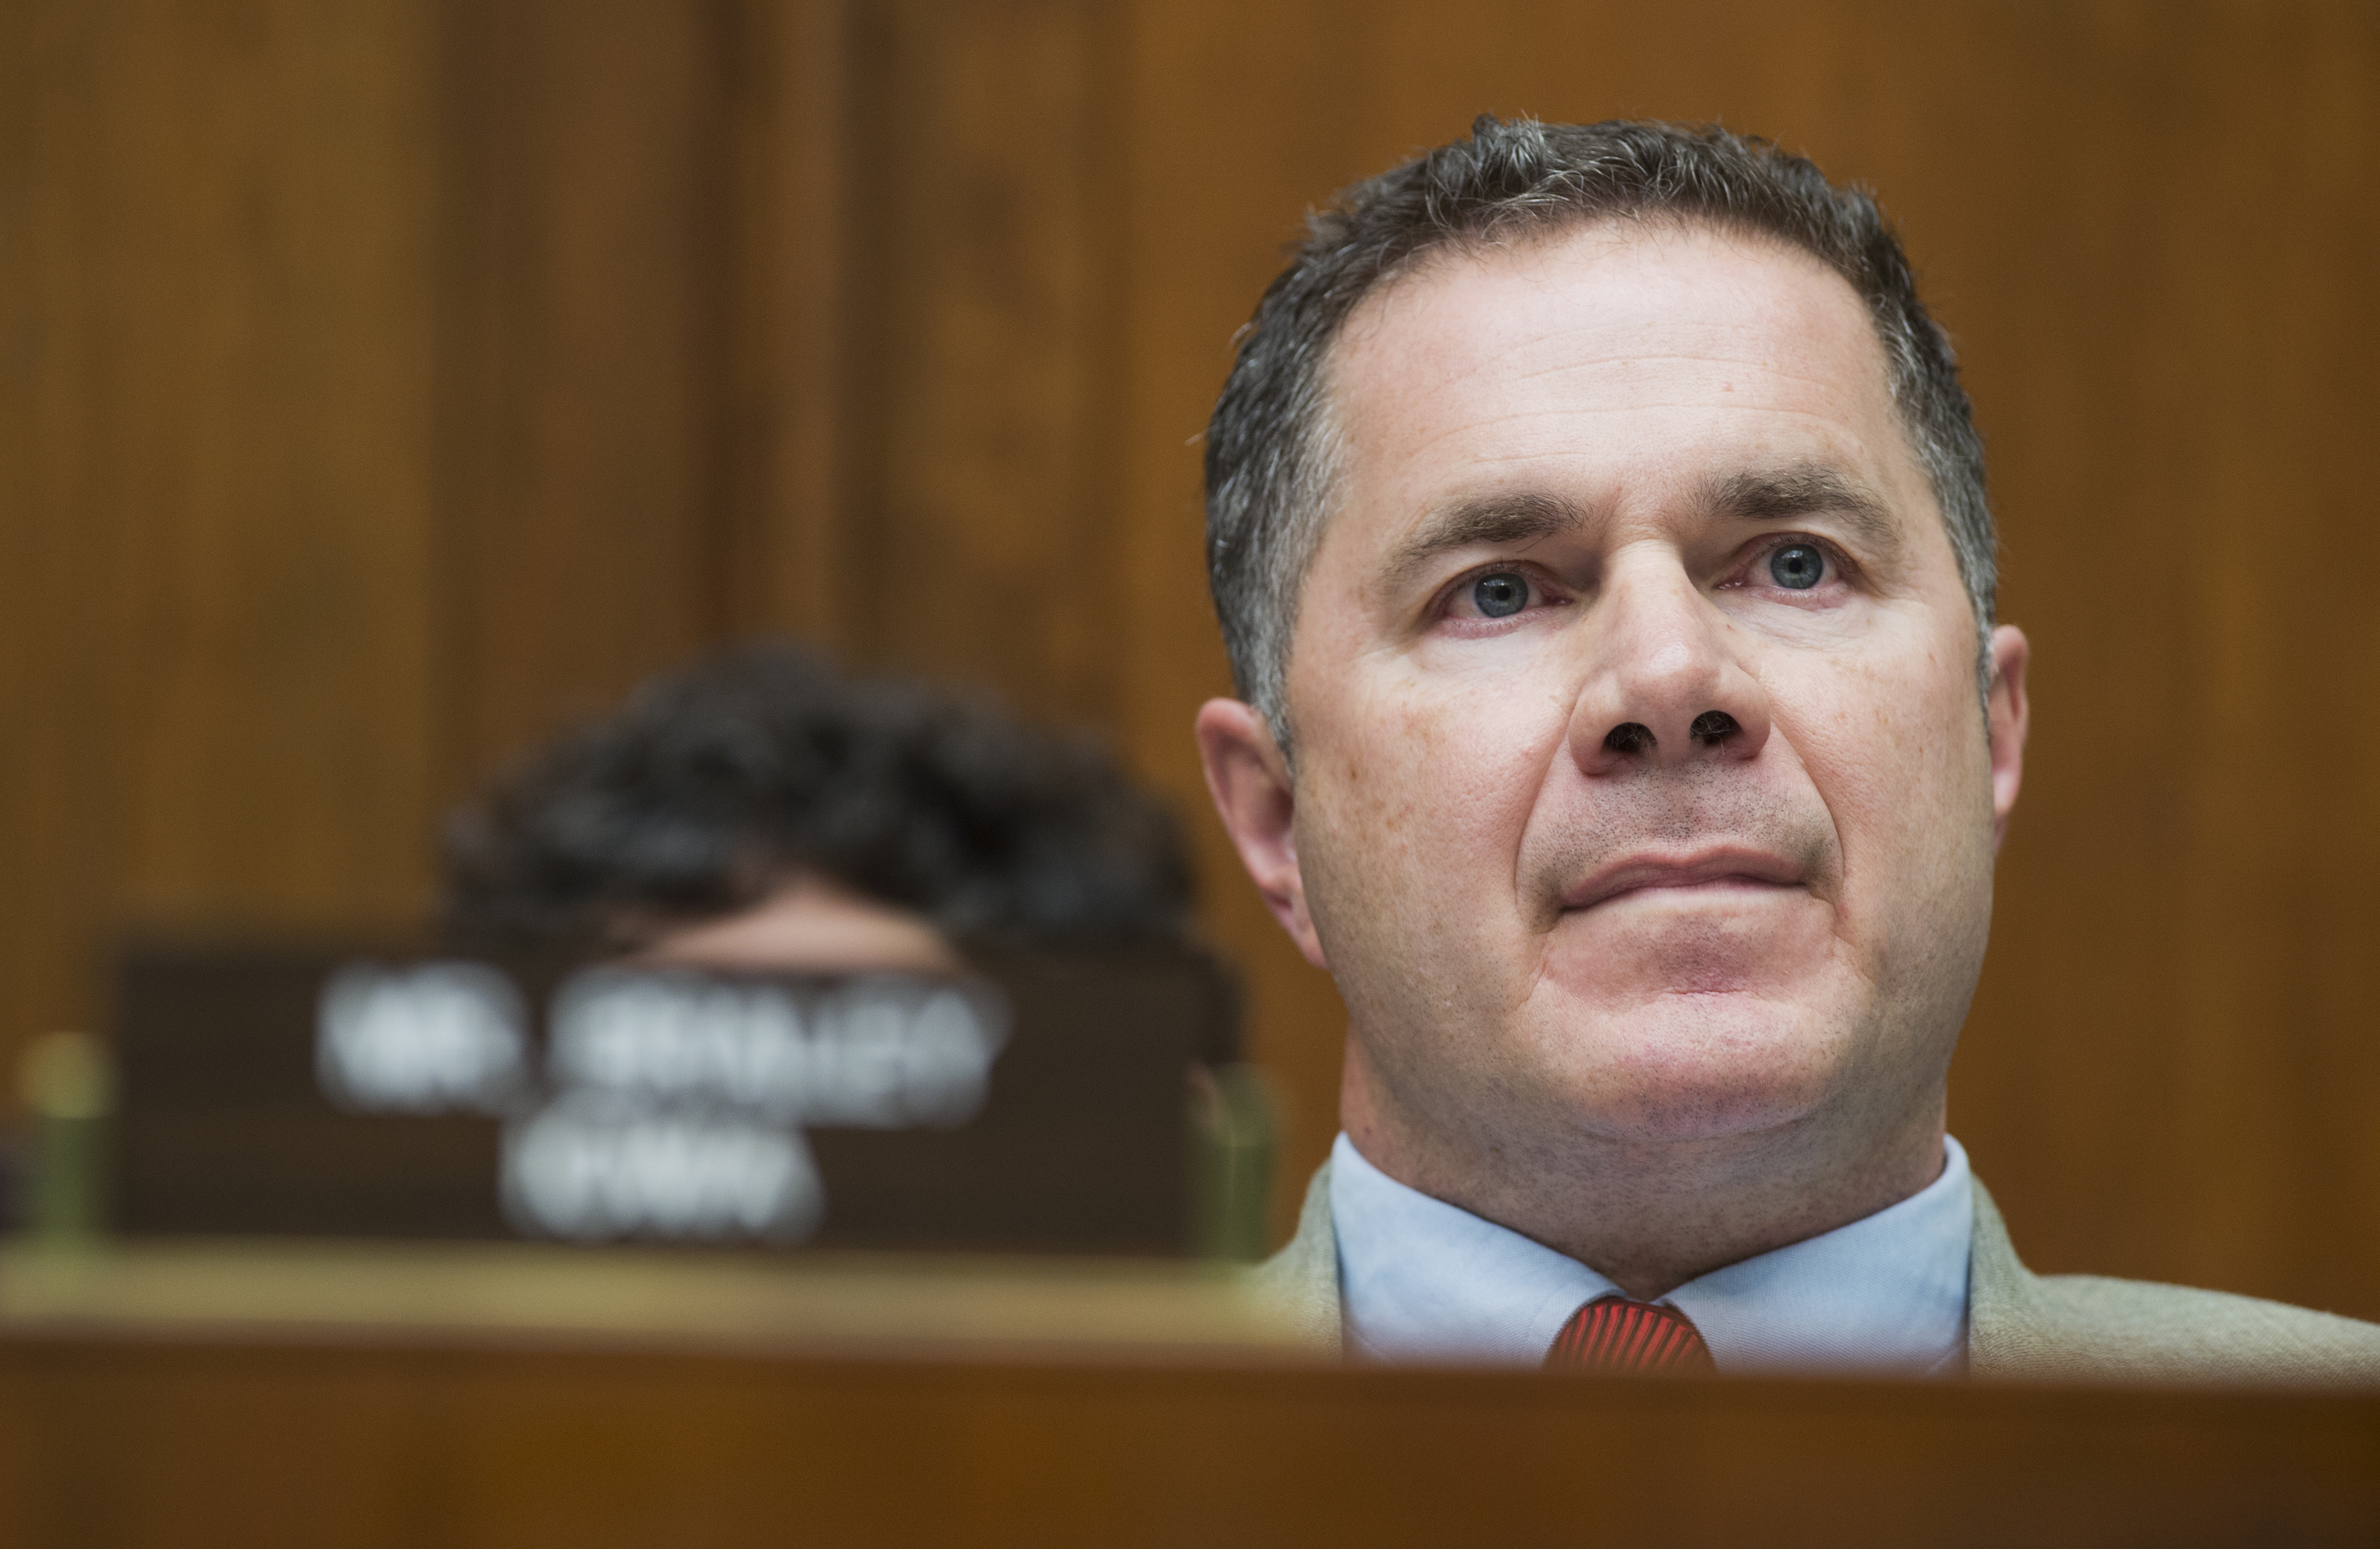 Rep. Bruce Braley, D-Iowa., listens to testimony by Mary Barra, CEO of General Motors, during a House Energy and Commerce Committee hearing in Washington on April 1, 2014. (Tom Williams—CQ-Roll Call/Getty Images)